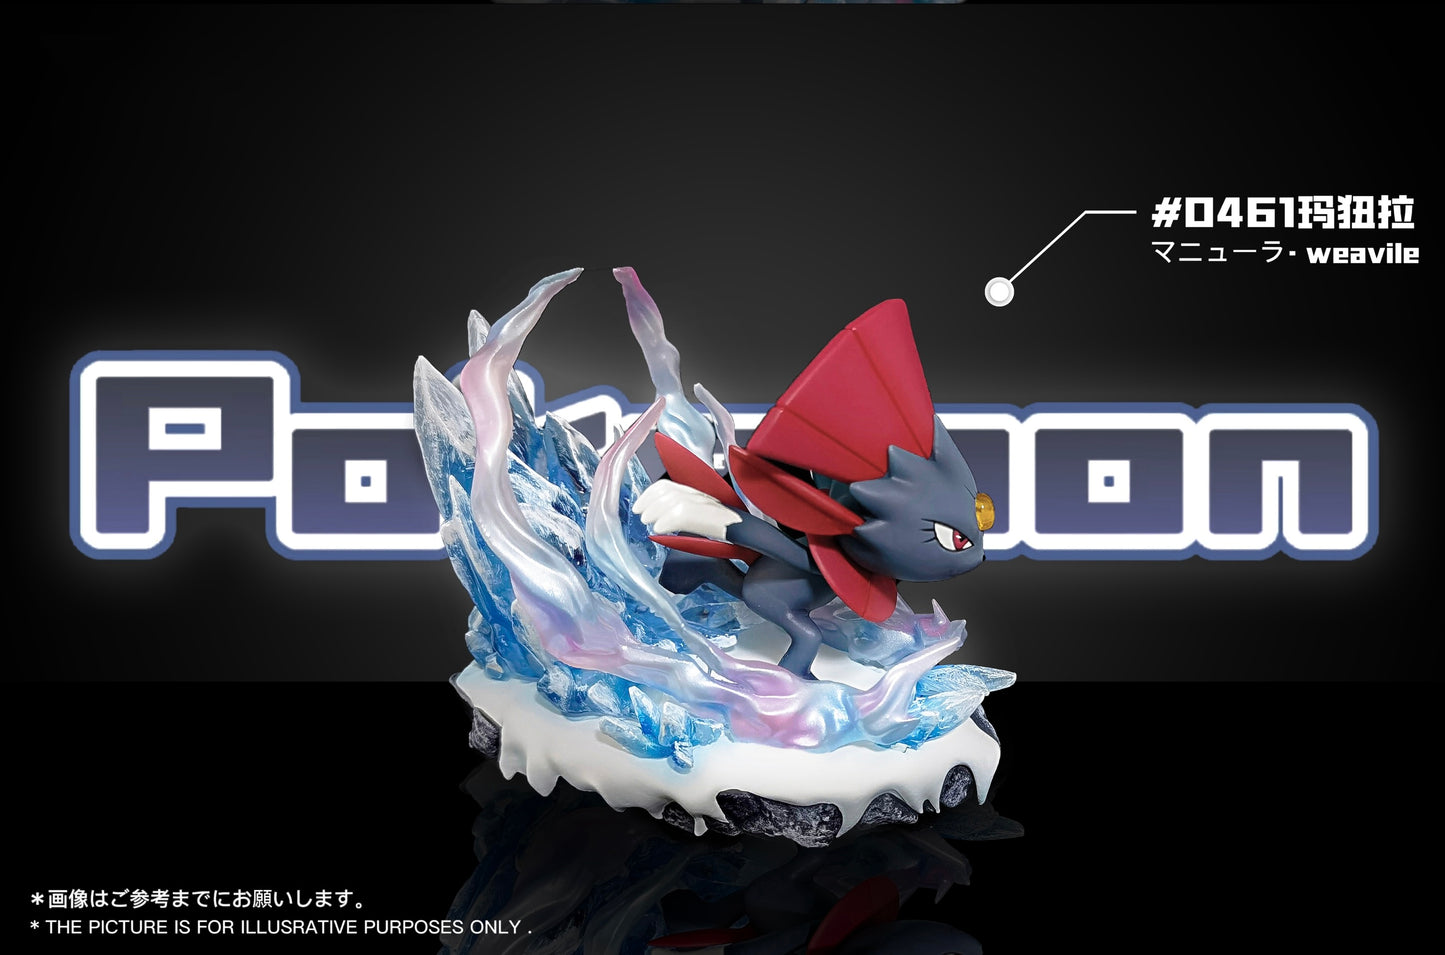 [PREORDER CLOSED] 1/20 Scale World Figure [TP] - Sneasel & Weavile